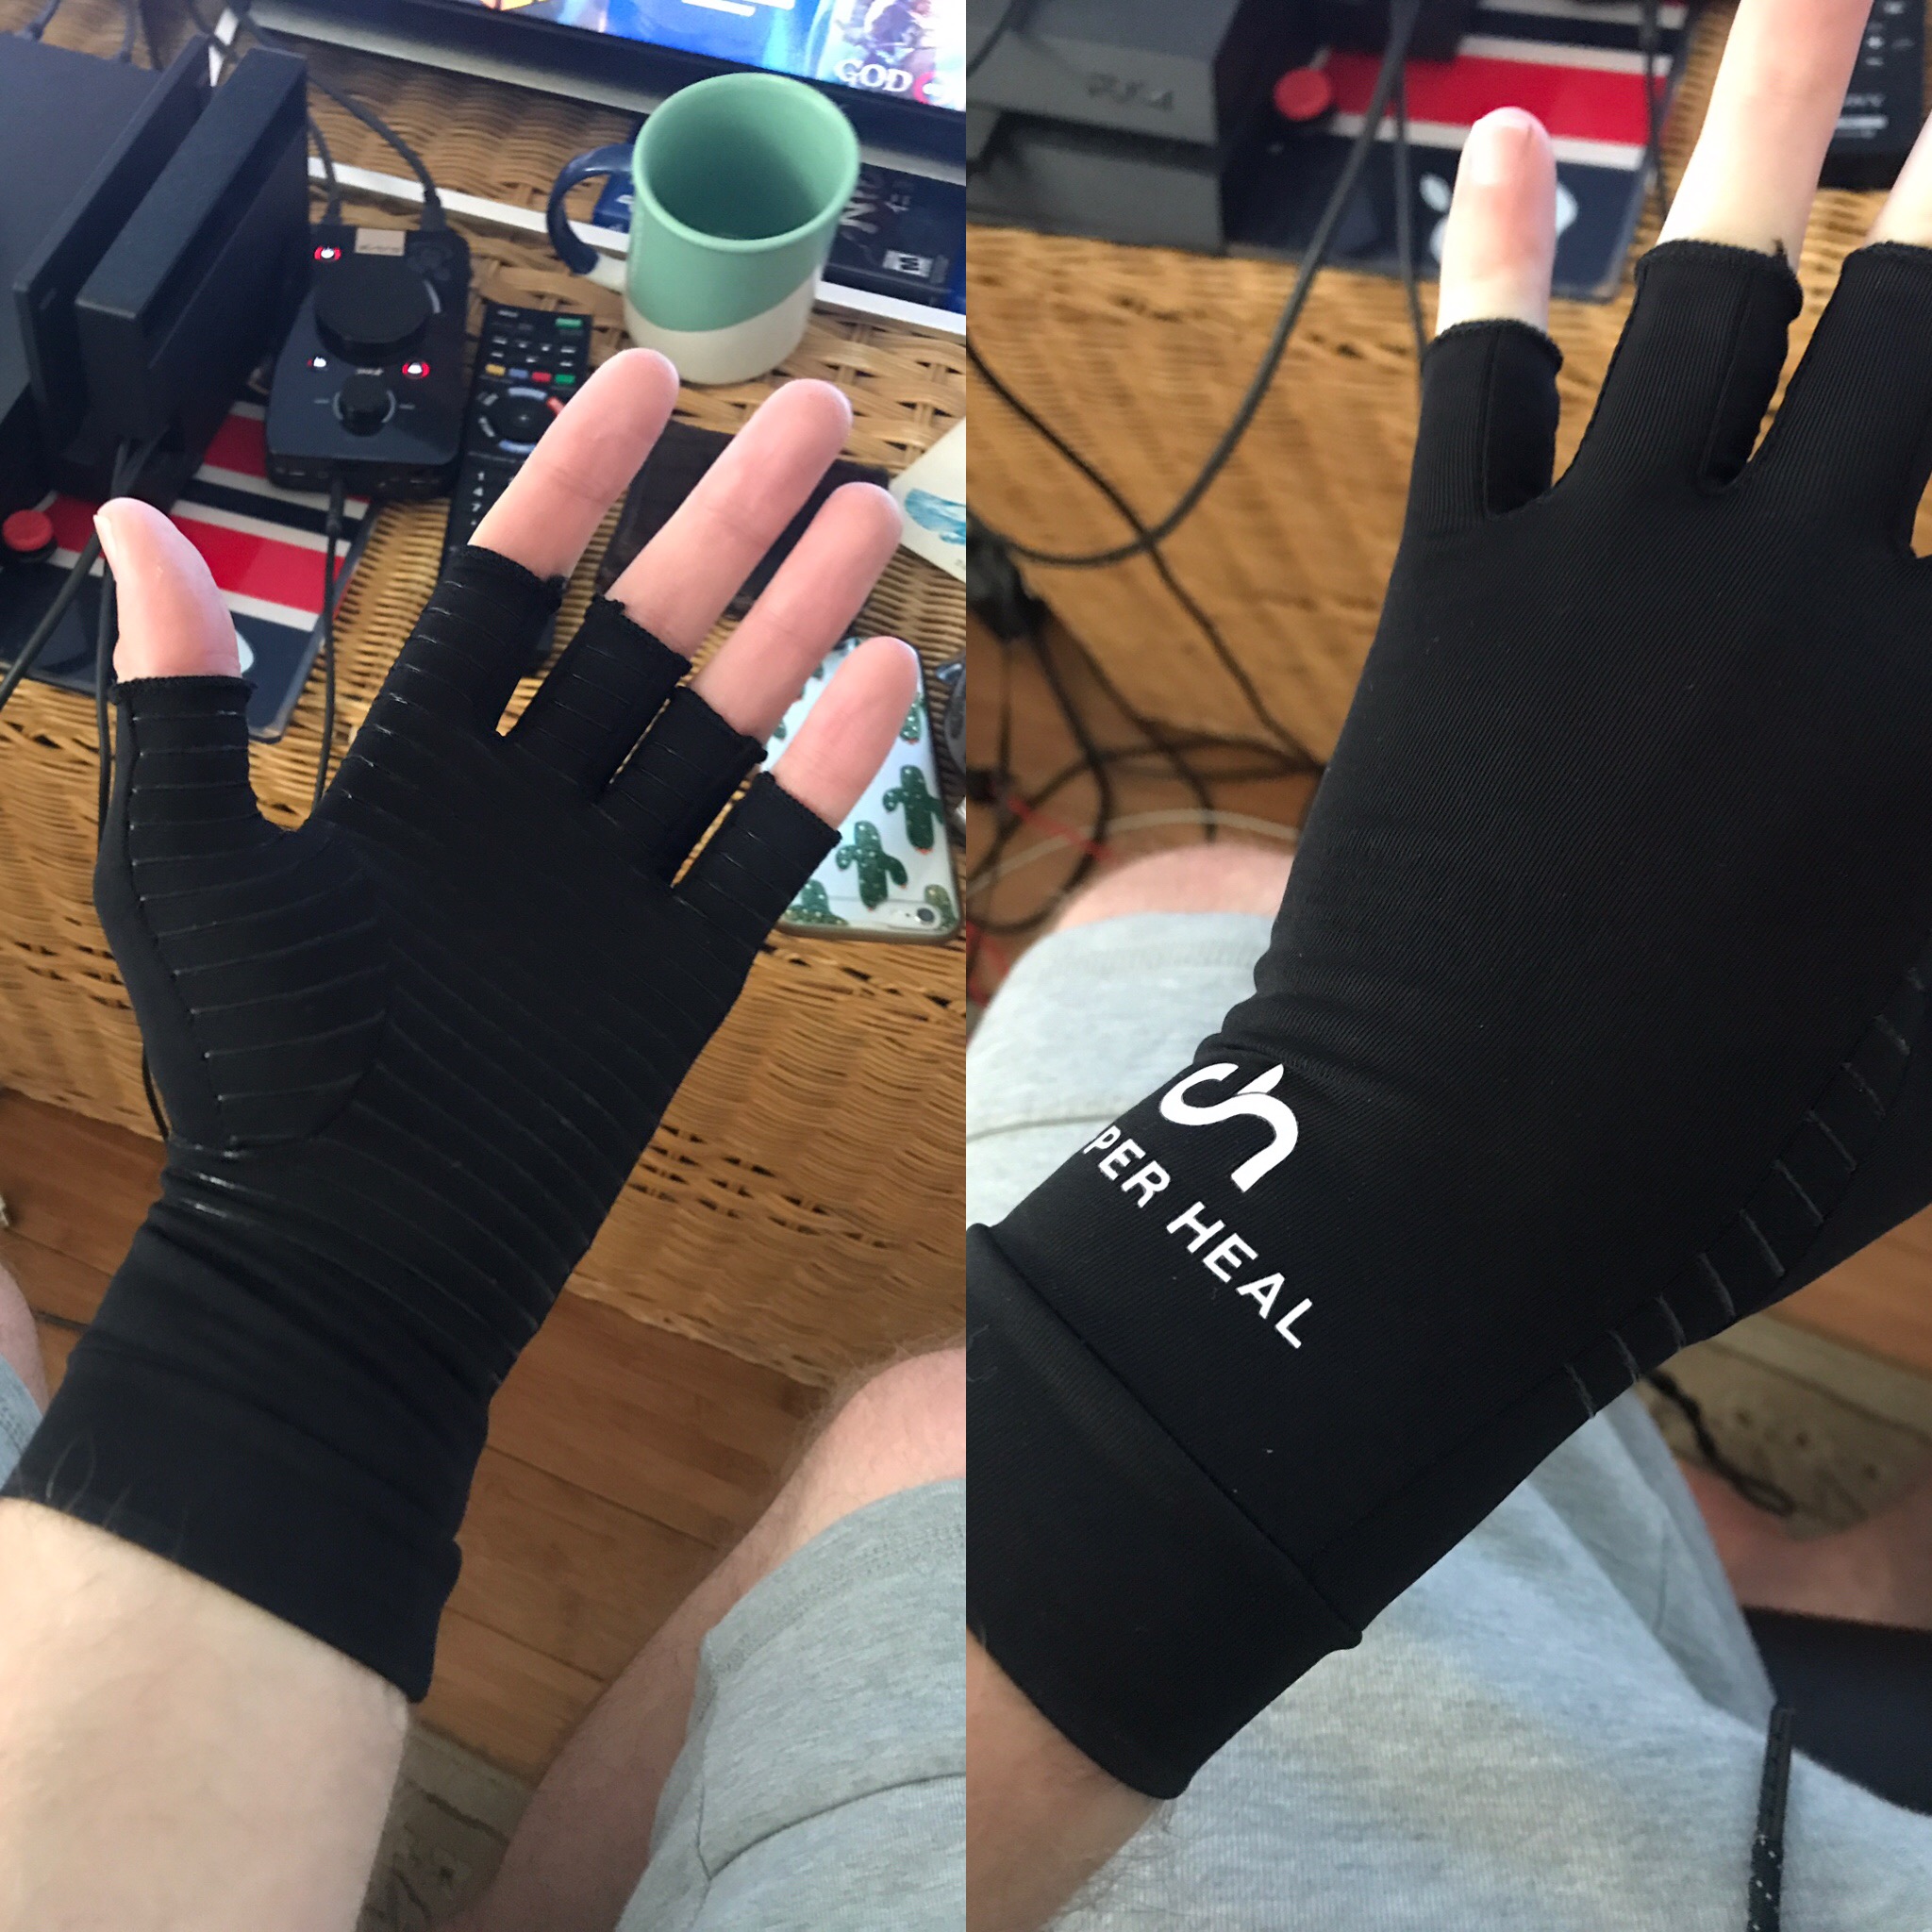 Seriously, Get Gamer Gloves - Last Nights Grime